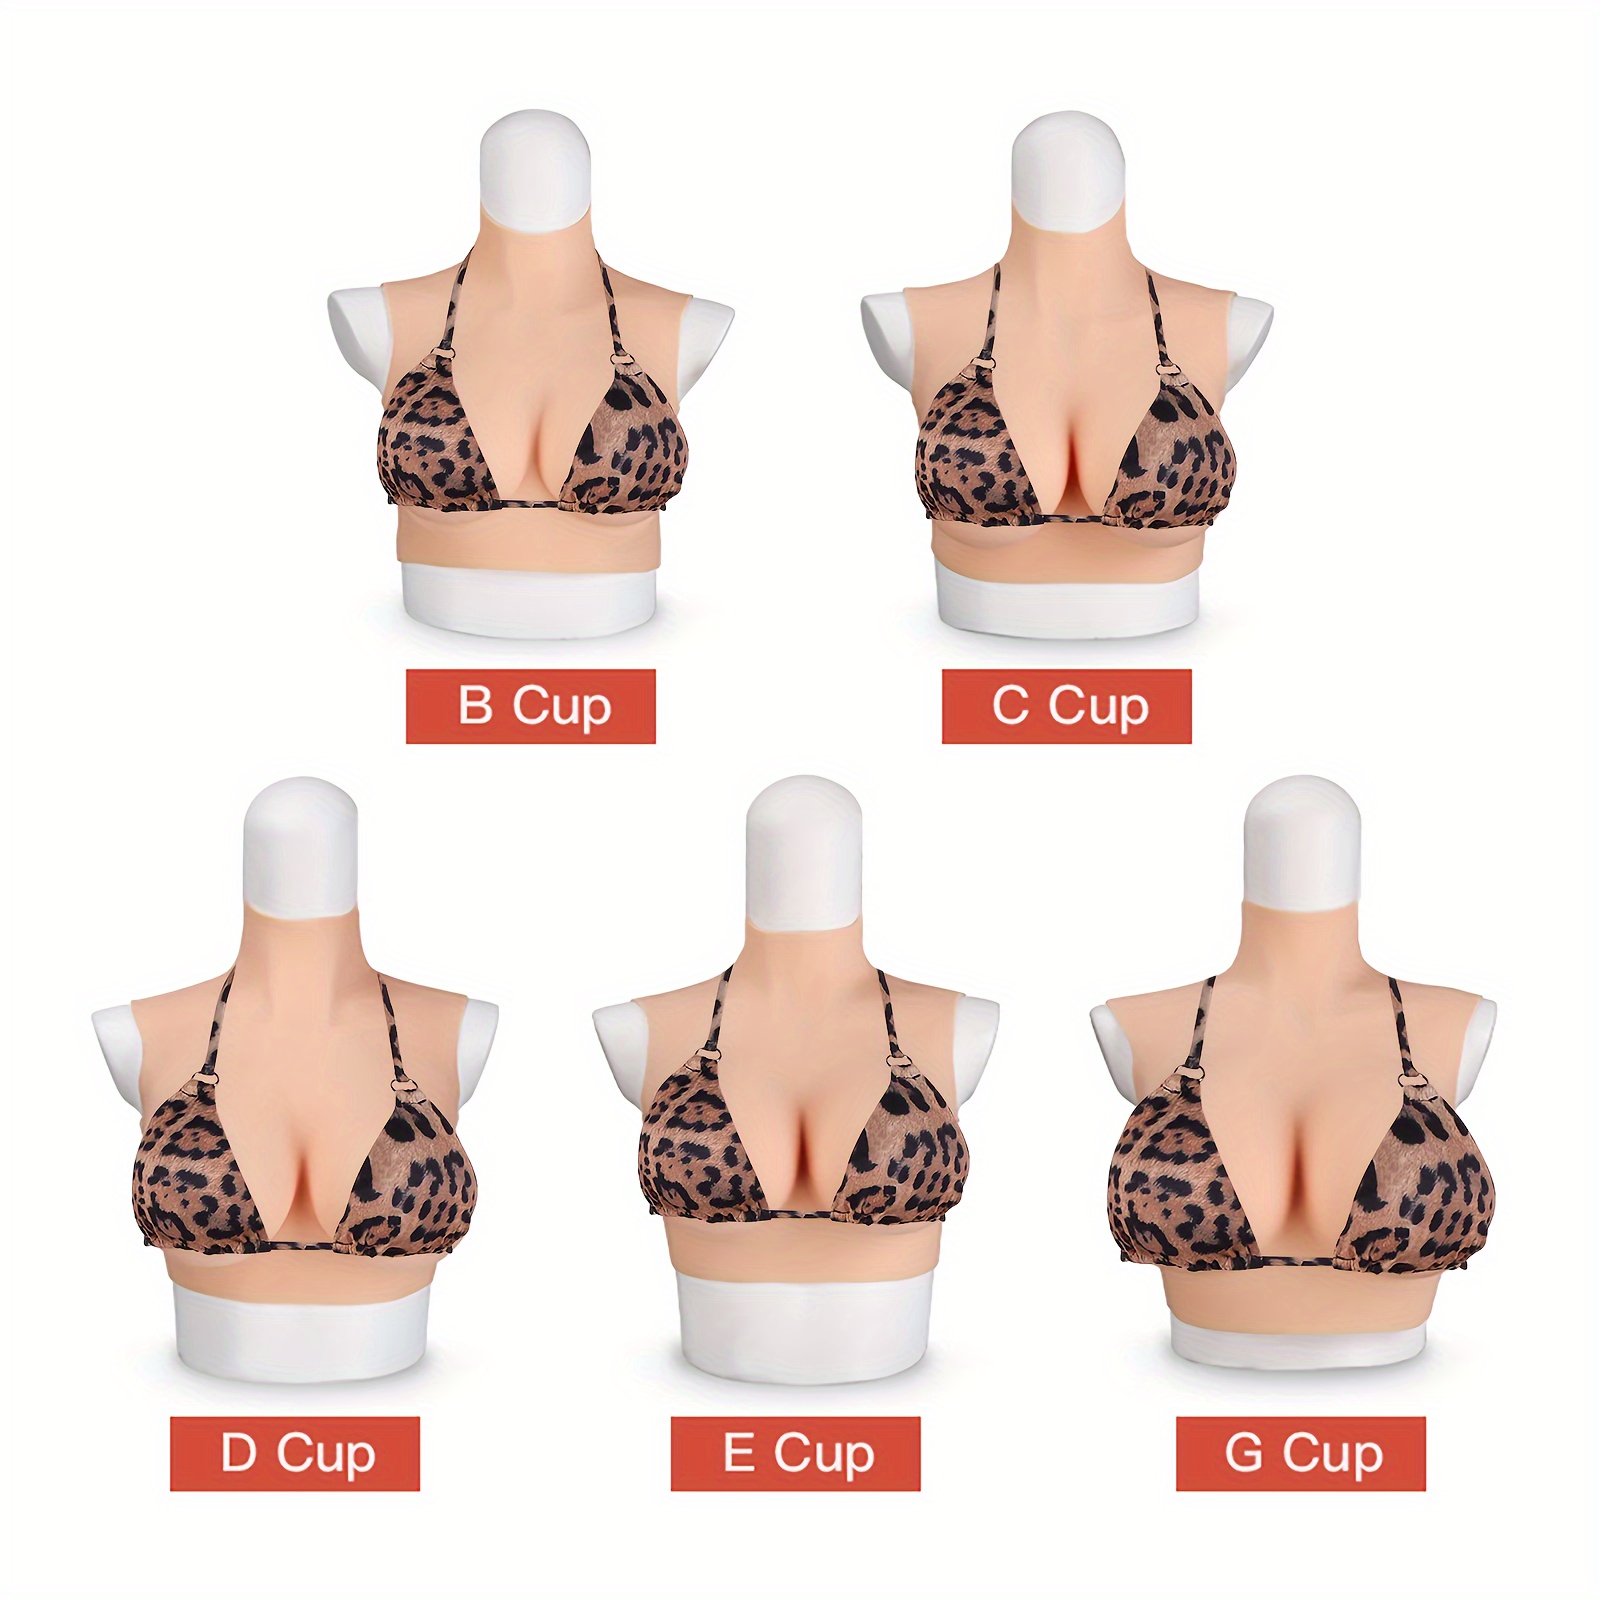 Fake Breasts Crossdressing Silicone Breast Form Realistic E-Cup